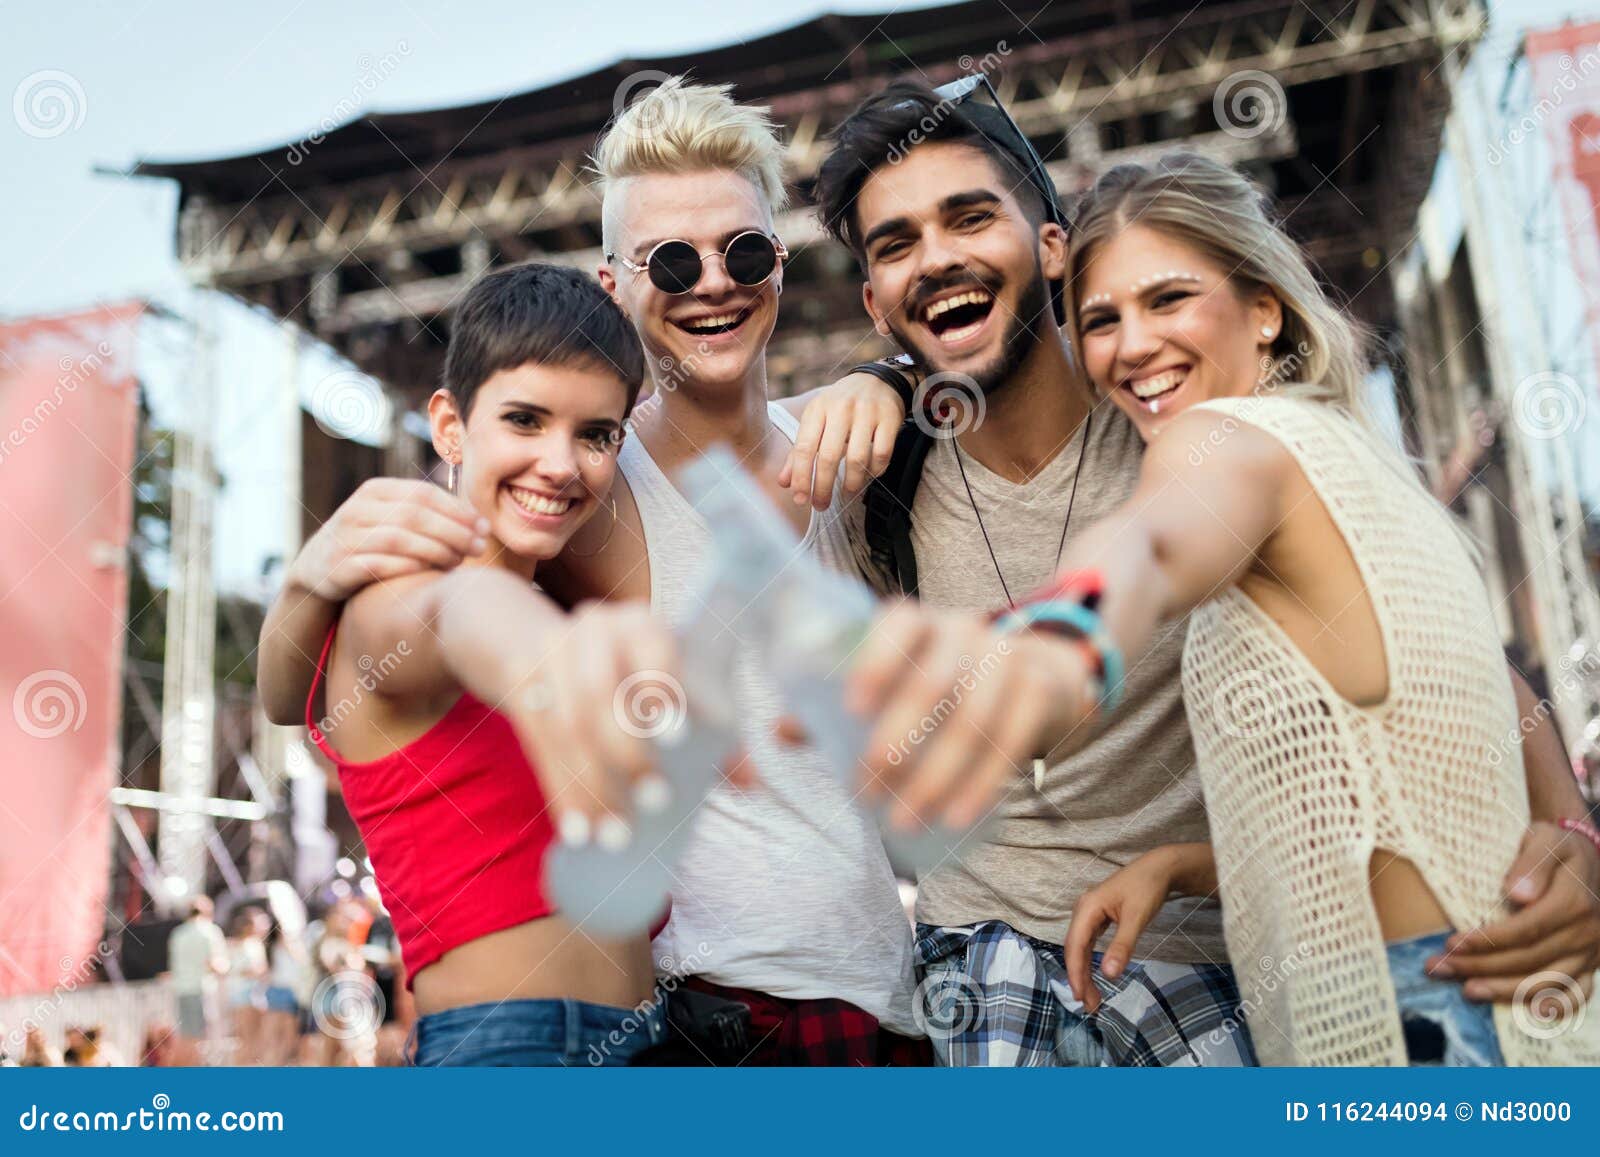 Happy Friends Having Fun at Music Festival Stock Photo - Image of ...